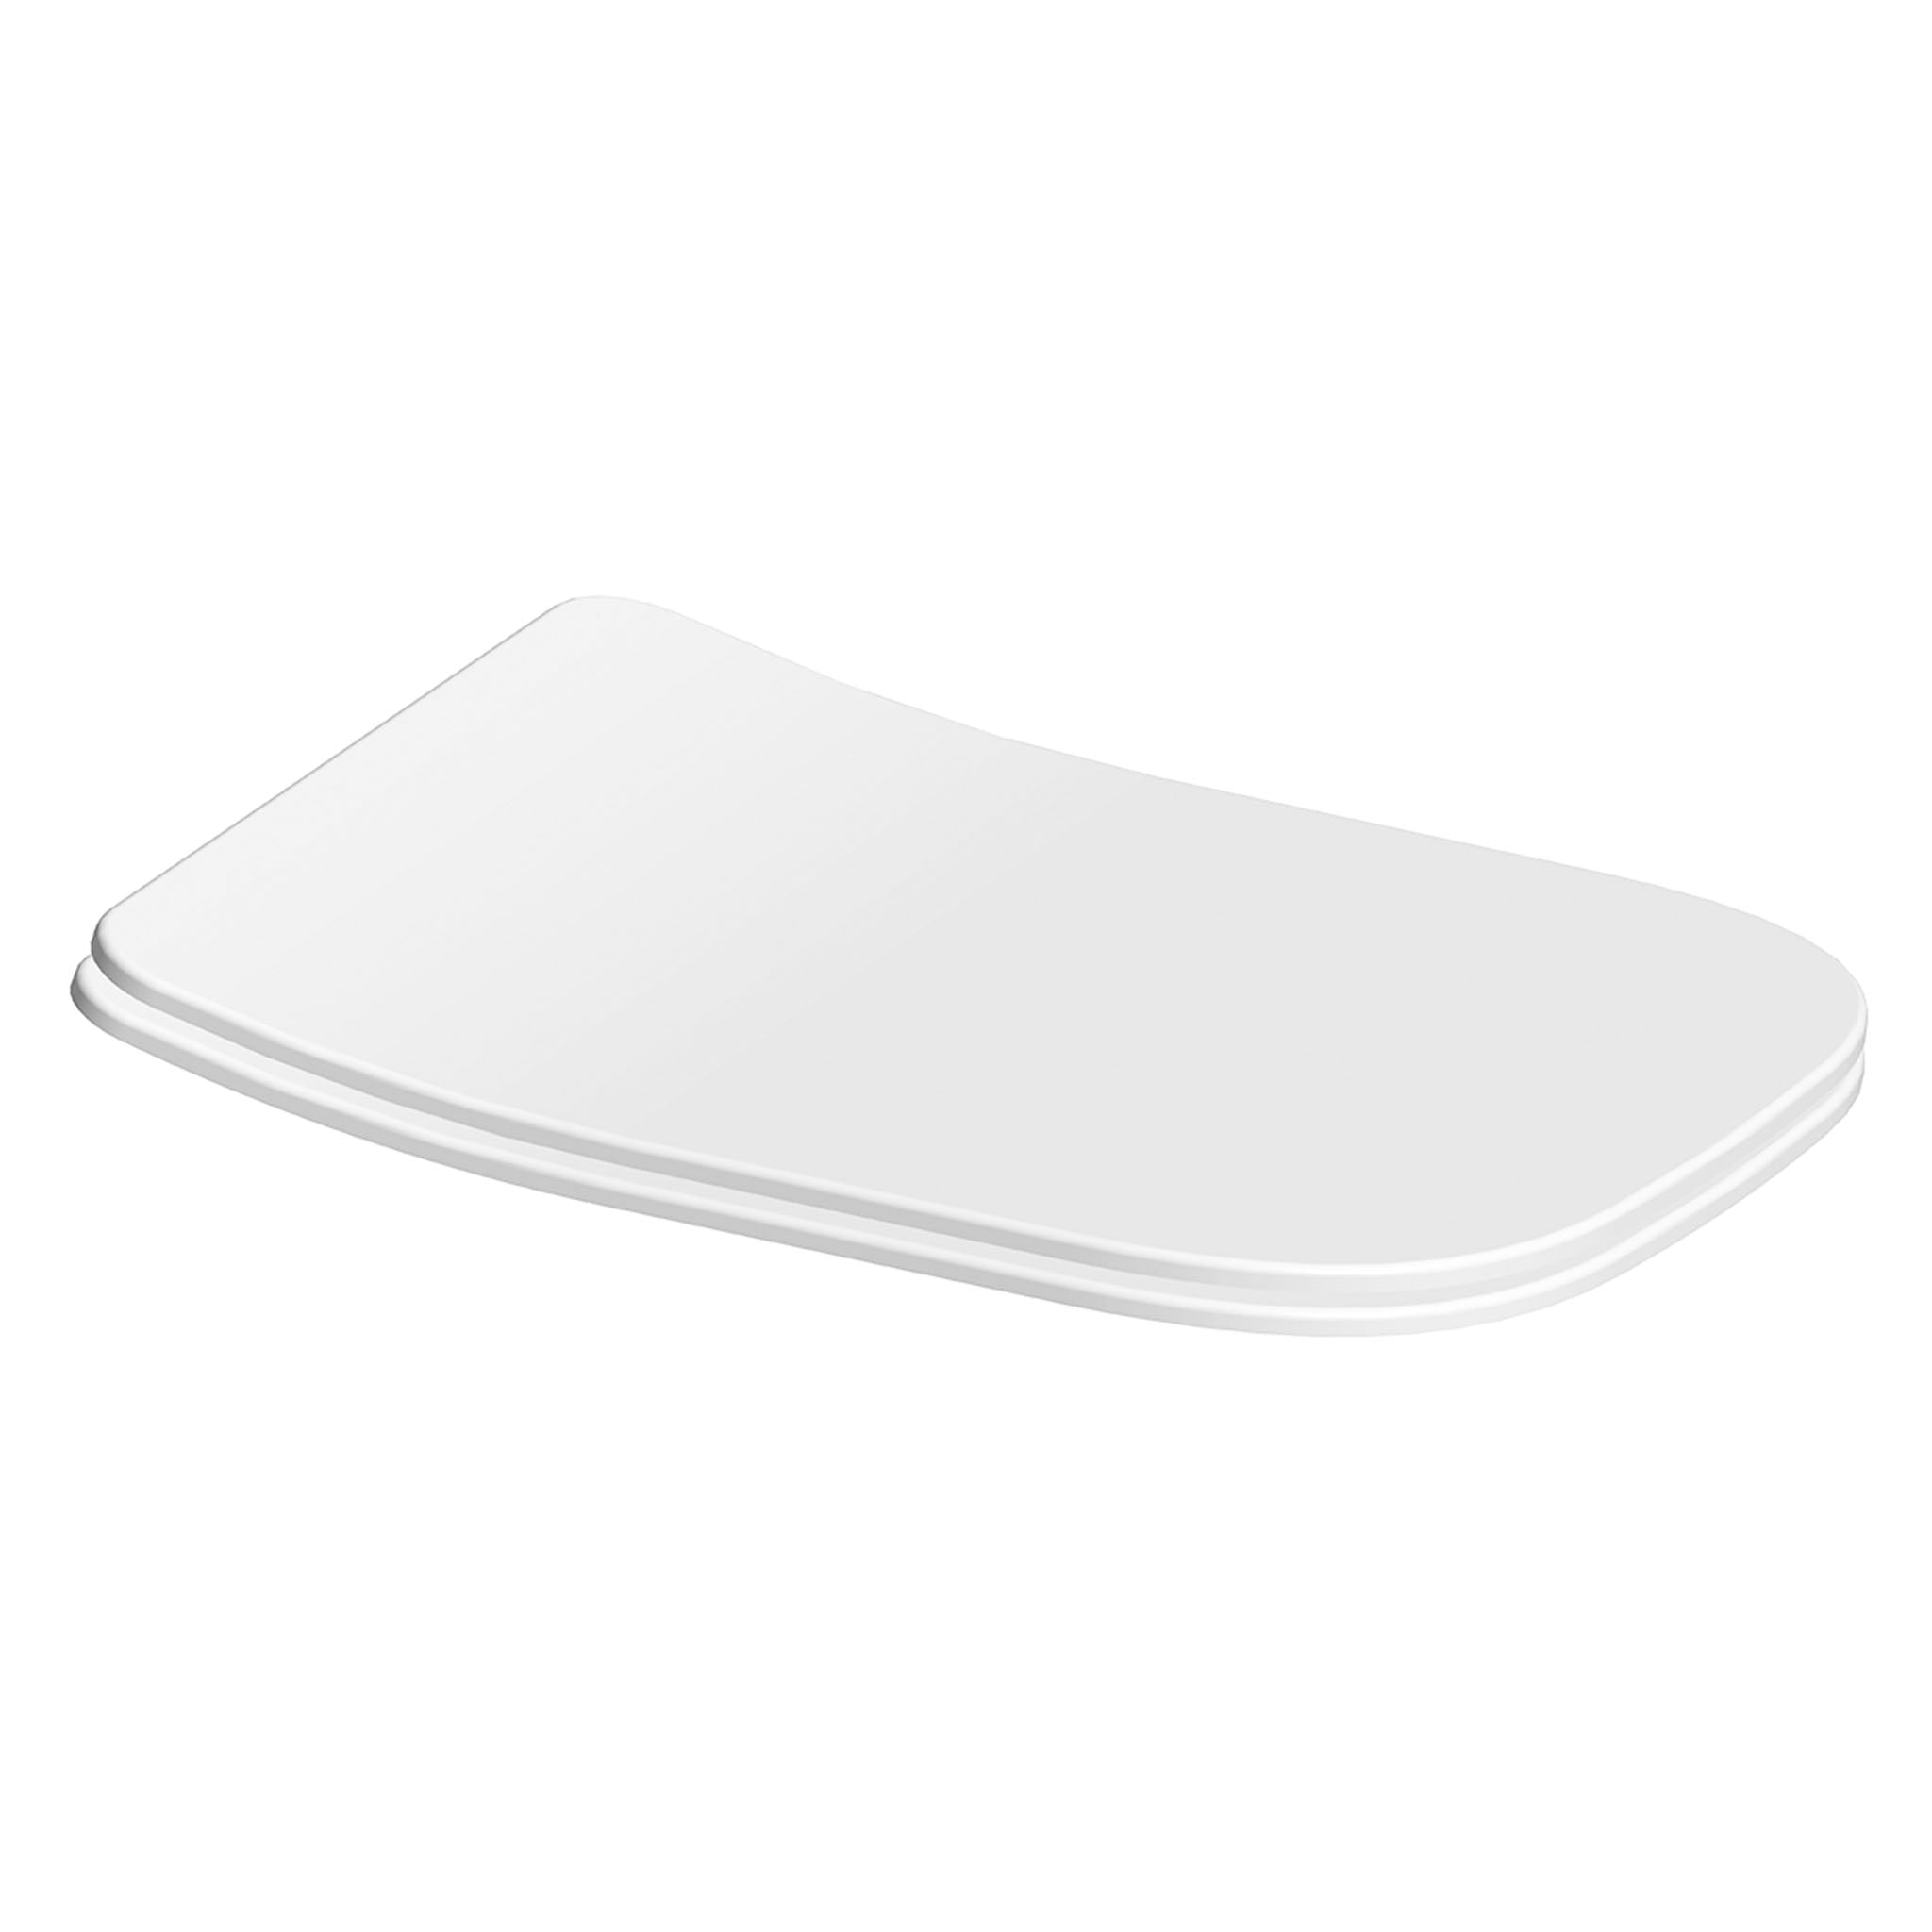 MyLife SQT Square Thin Soft Close Quick Release Toilet Seat